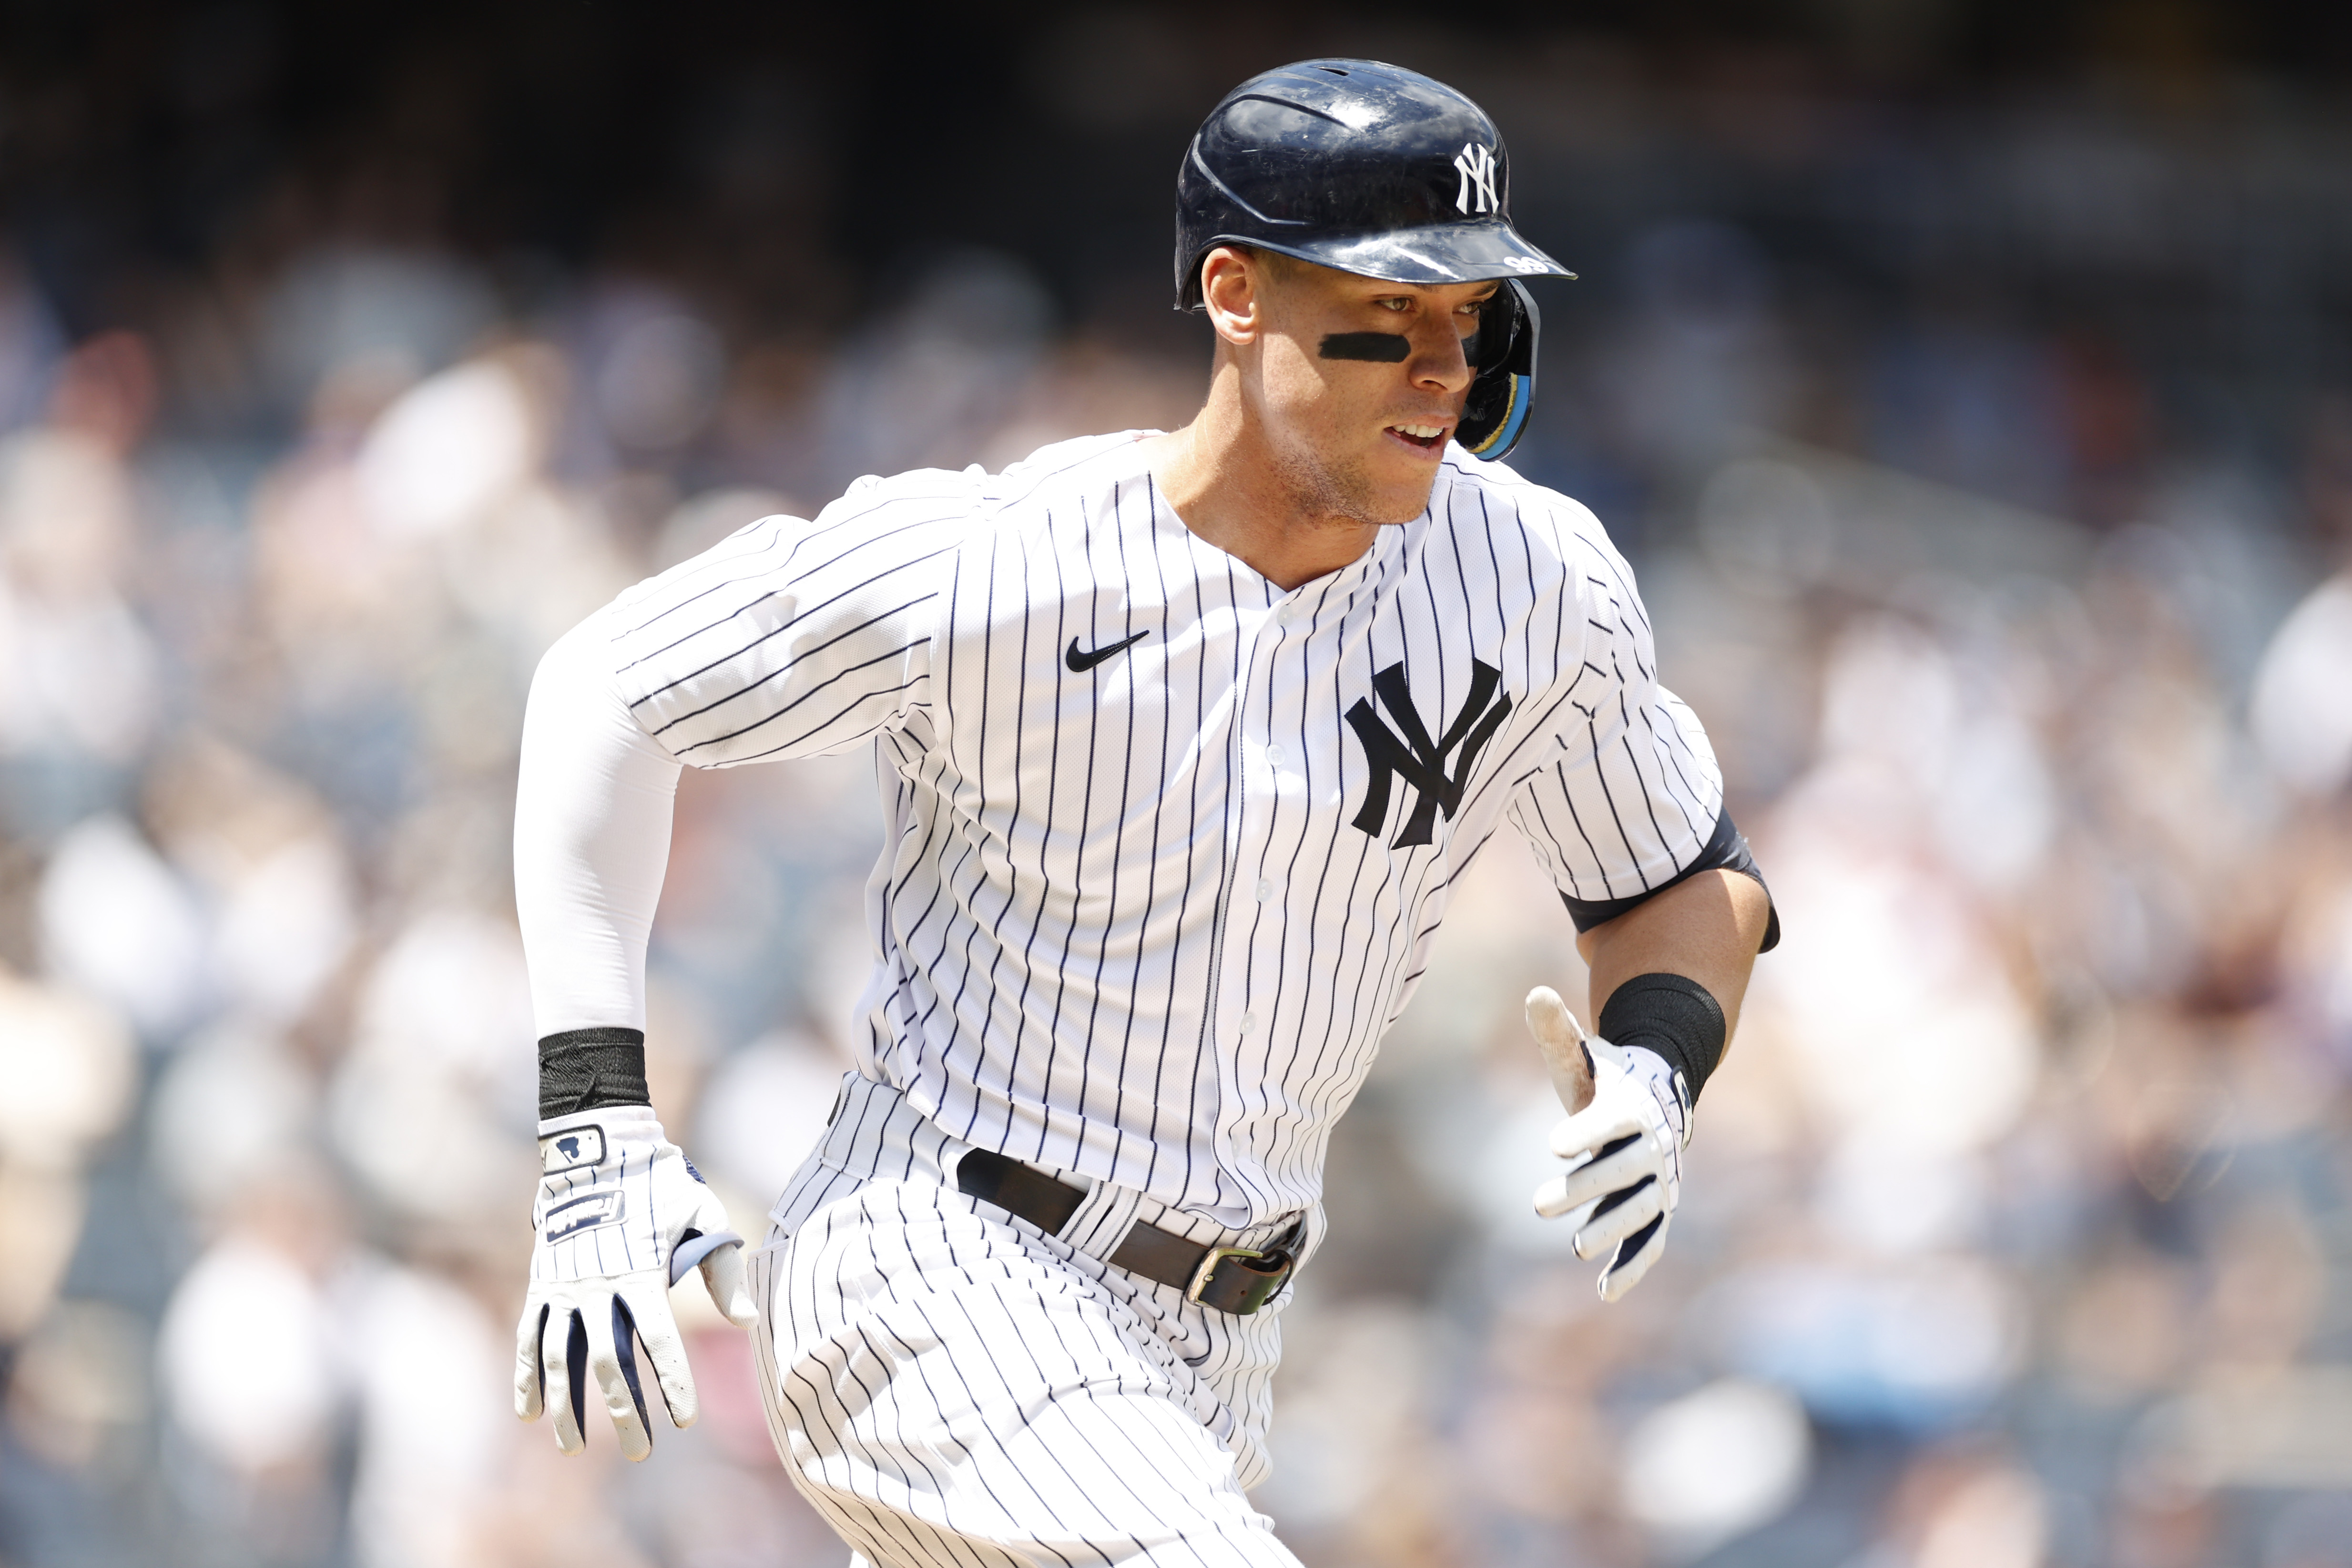 Ranking the Yankees' 8 best options at shortstop in 2022, from